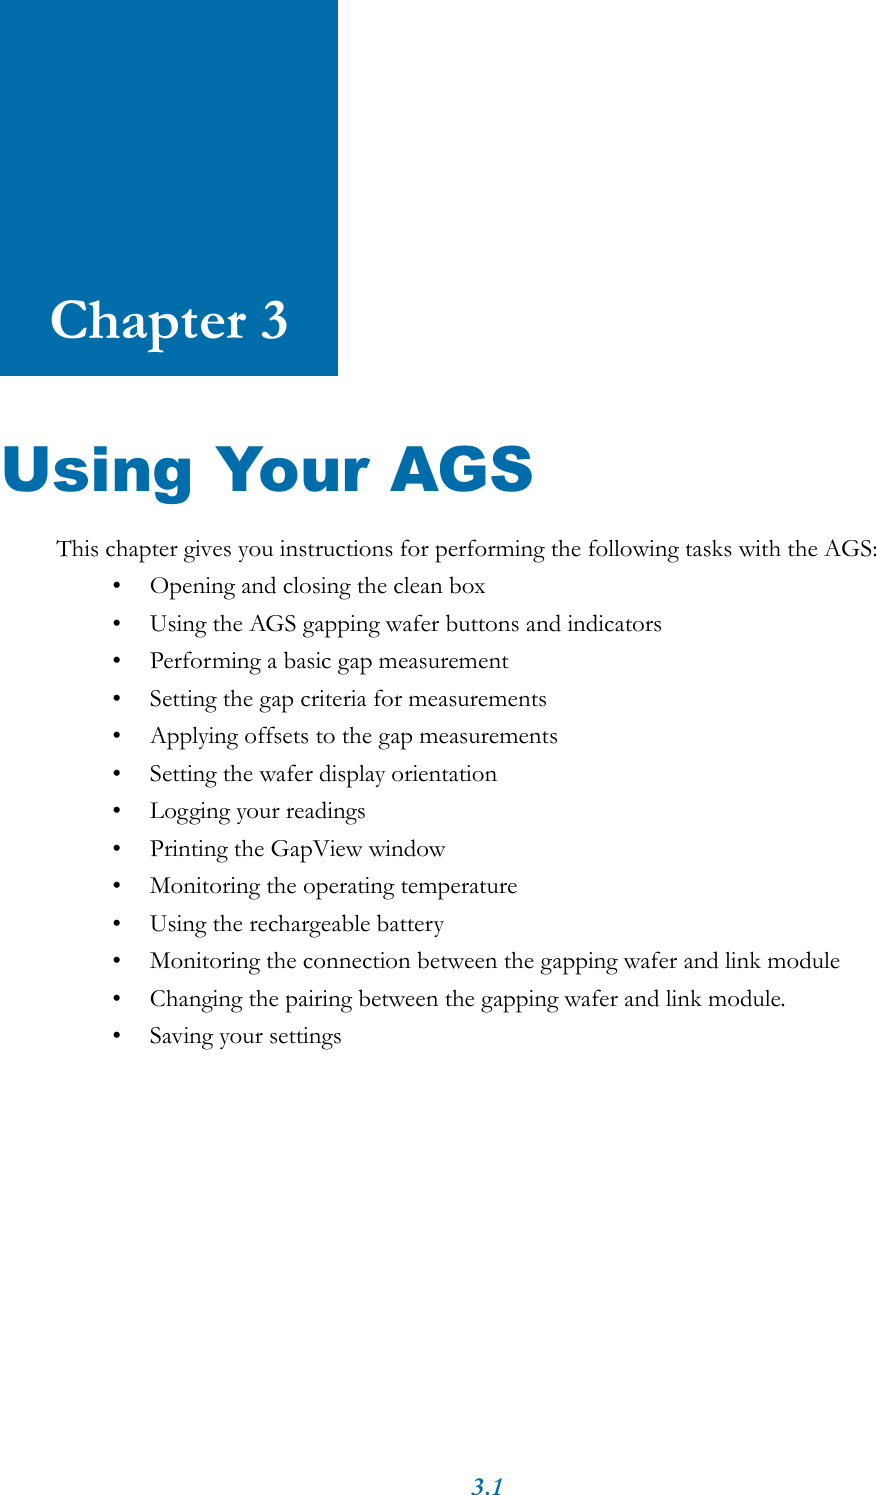 3.1Chapter 3Using Your AGSThis chapter gives you instructions for performing the following tasks with the AGS:• Opening and closing the clean box• Using the AGS gapping wafer buttons and indicators• Performing a basic gap measurement• Setting the gap criteria for measurements• Applying offsets to the gap measurements• Setting the wafer display orientation• Logging your readings• Printing the GapView window• Monitoring the operating temperature• Using the rechargeable battery• Monitoring the connection between the gapping wafer and link module• Changing the pairing between the gapping wafer and link module.• Saving your settings